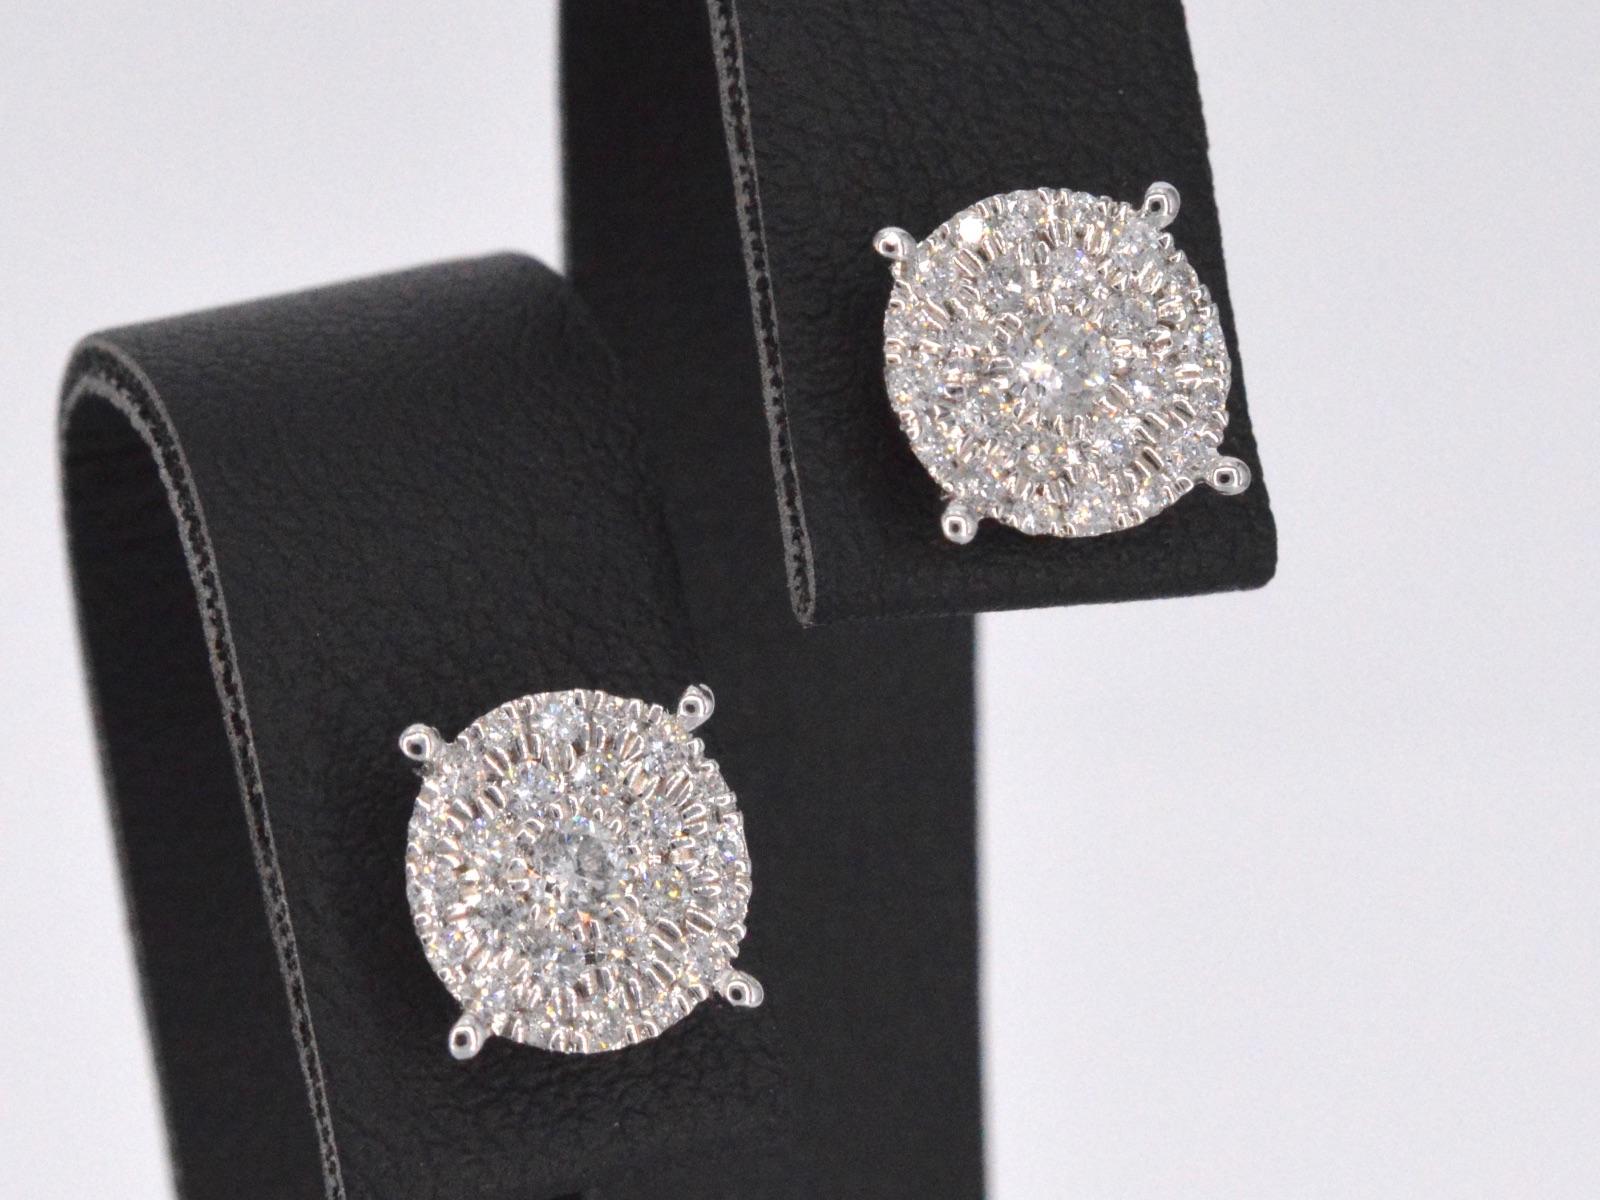 Women's White Gold Earrings with a Brilliant Cut Diamond For Sale